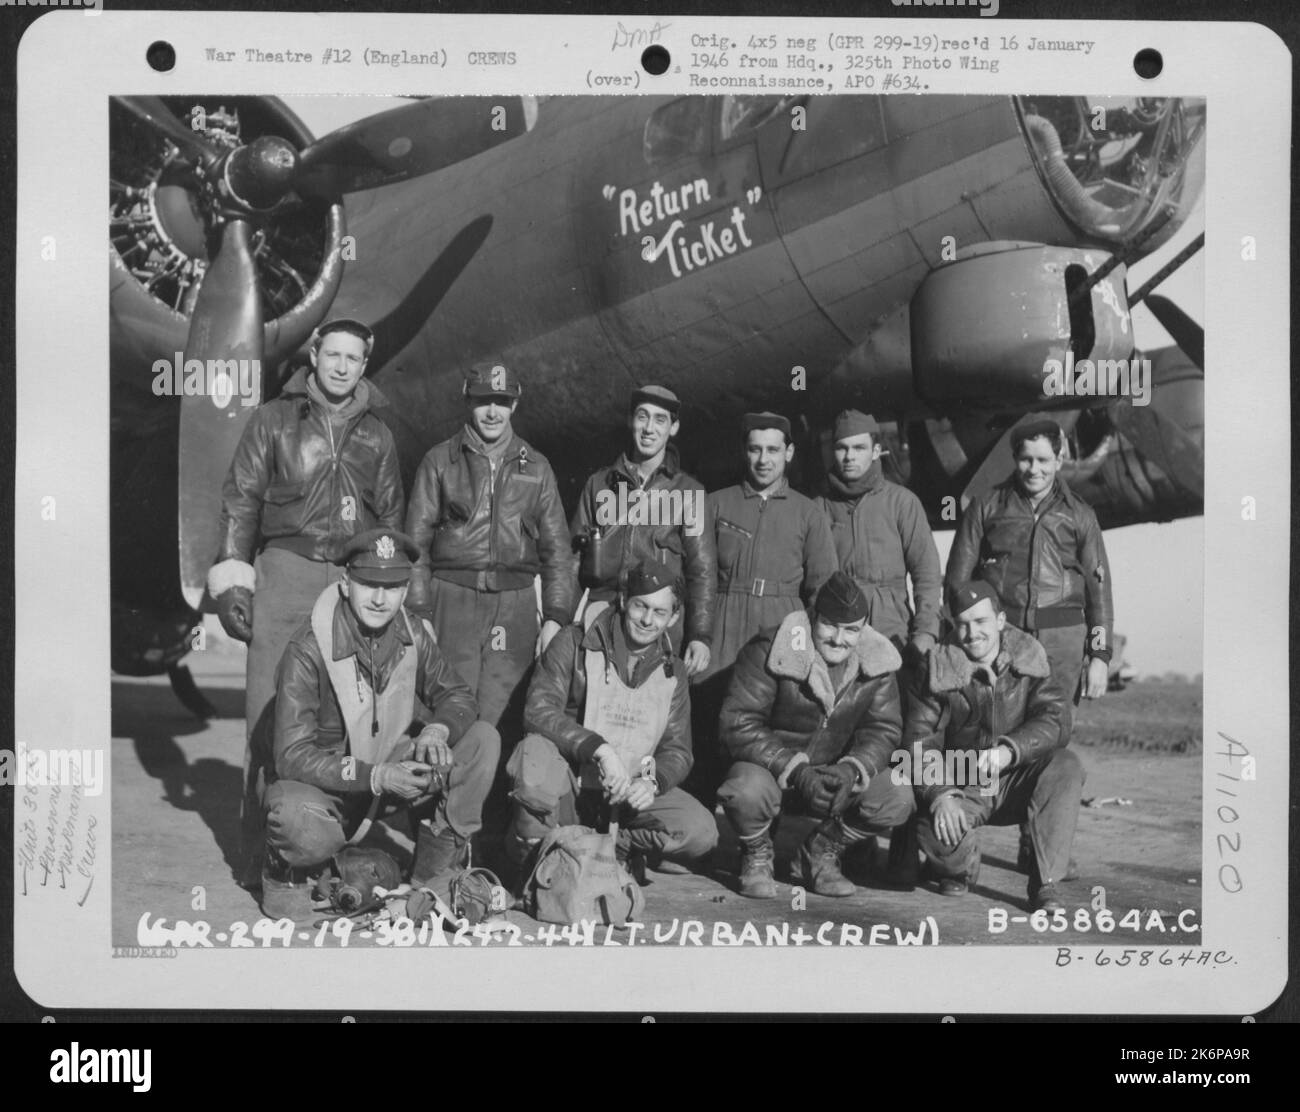 Lt. Urban And Crew Of The 381St Bomb Group In Front Of A Boeing B-17 'Flying Fortress' 'Return Ticket' At 8Th Air Force Station 167, England. 24 February 1944. Stock Photo